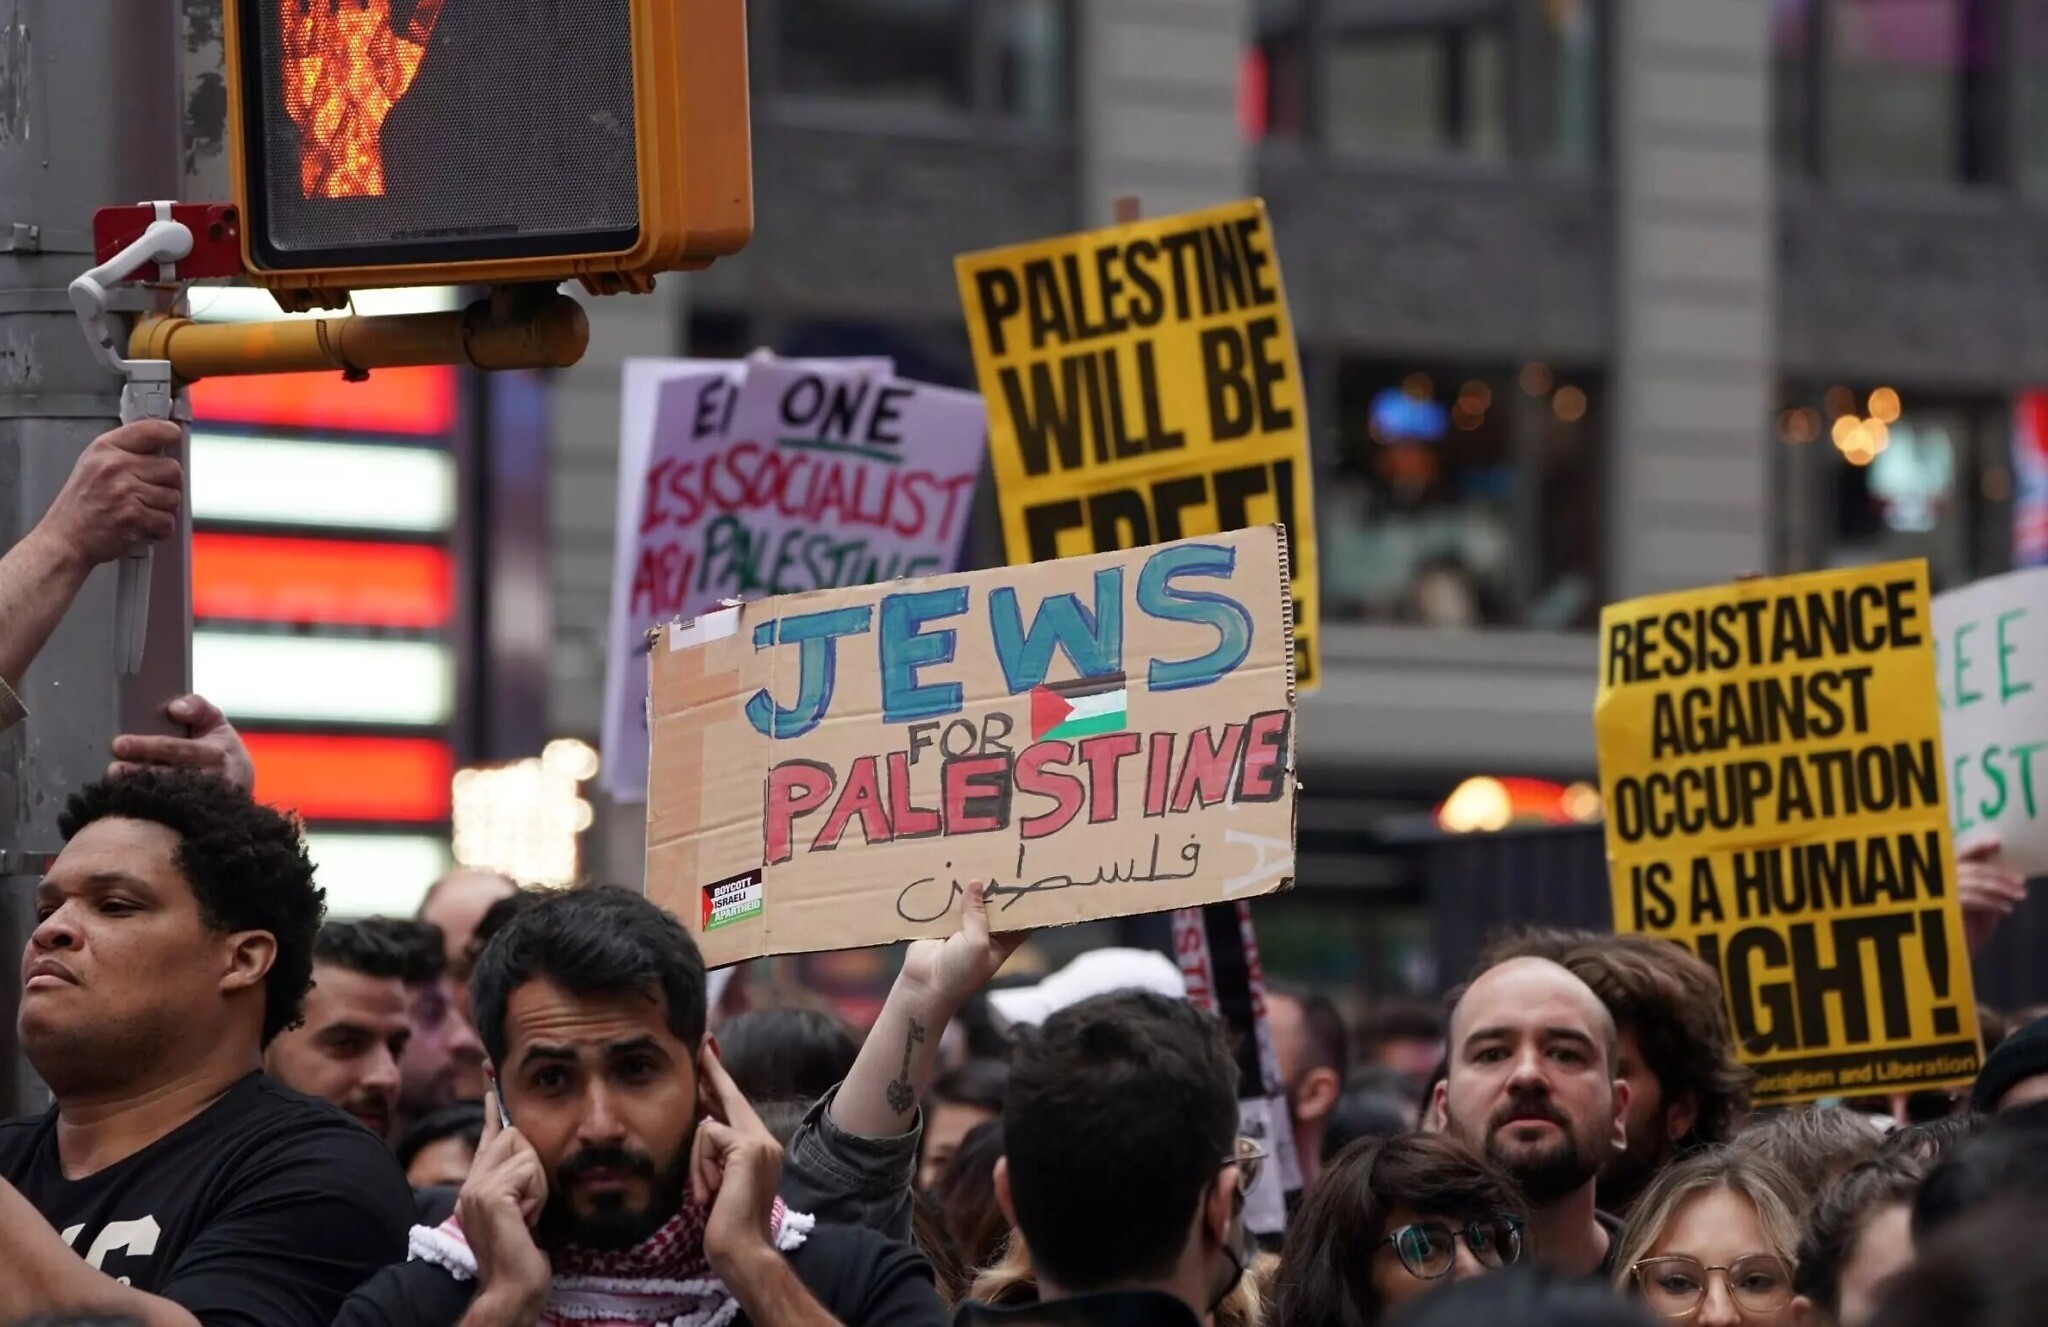 New York Jews Speak Out Over the Dehumanization of Palestinians